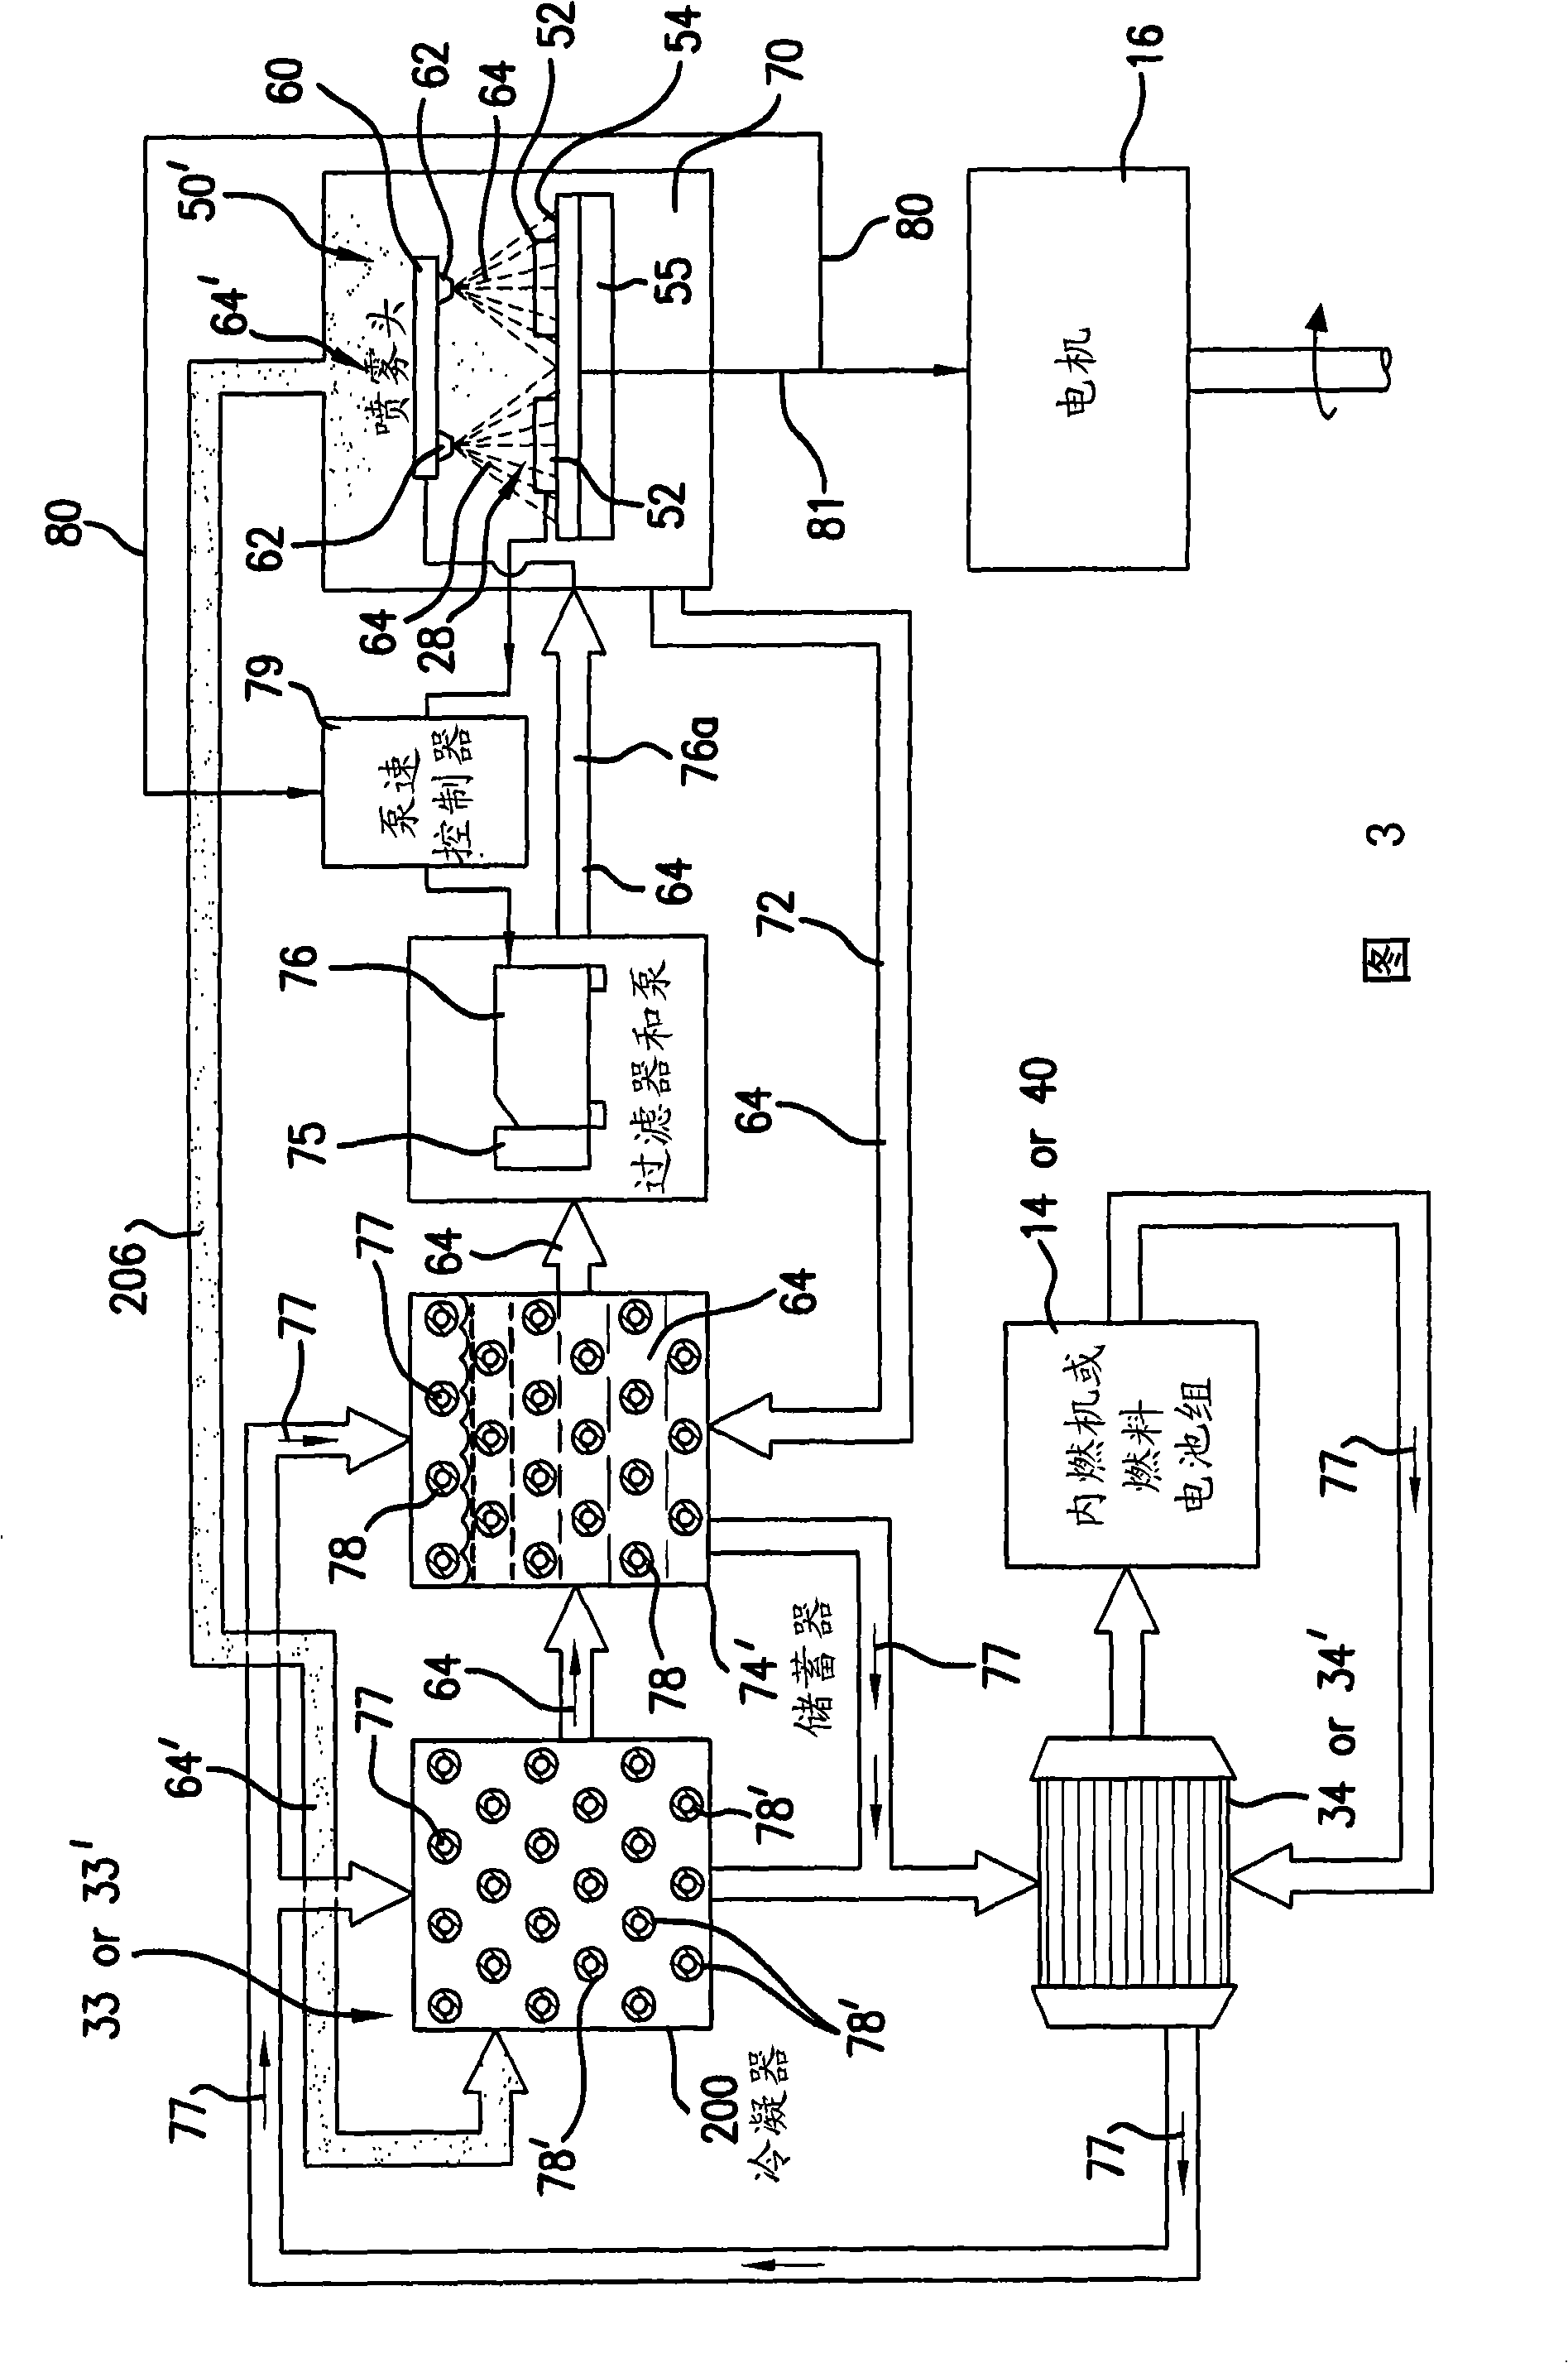 Apparatus and method for cooling phase transition of electric and electronic equipment